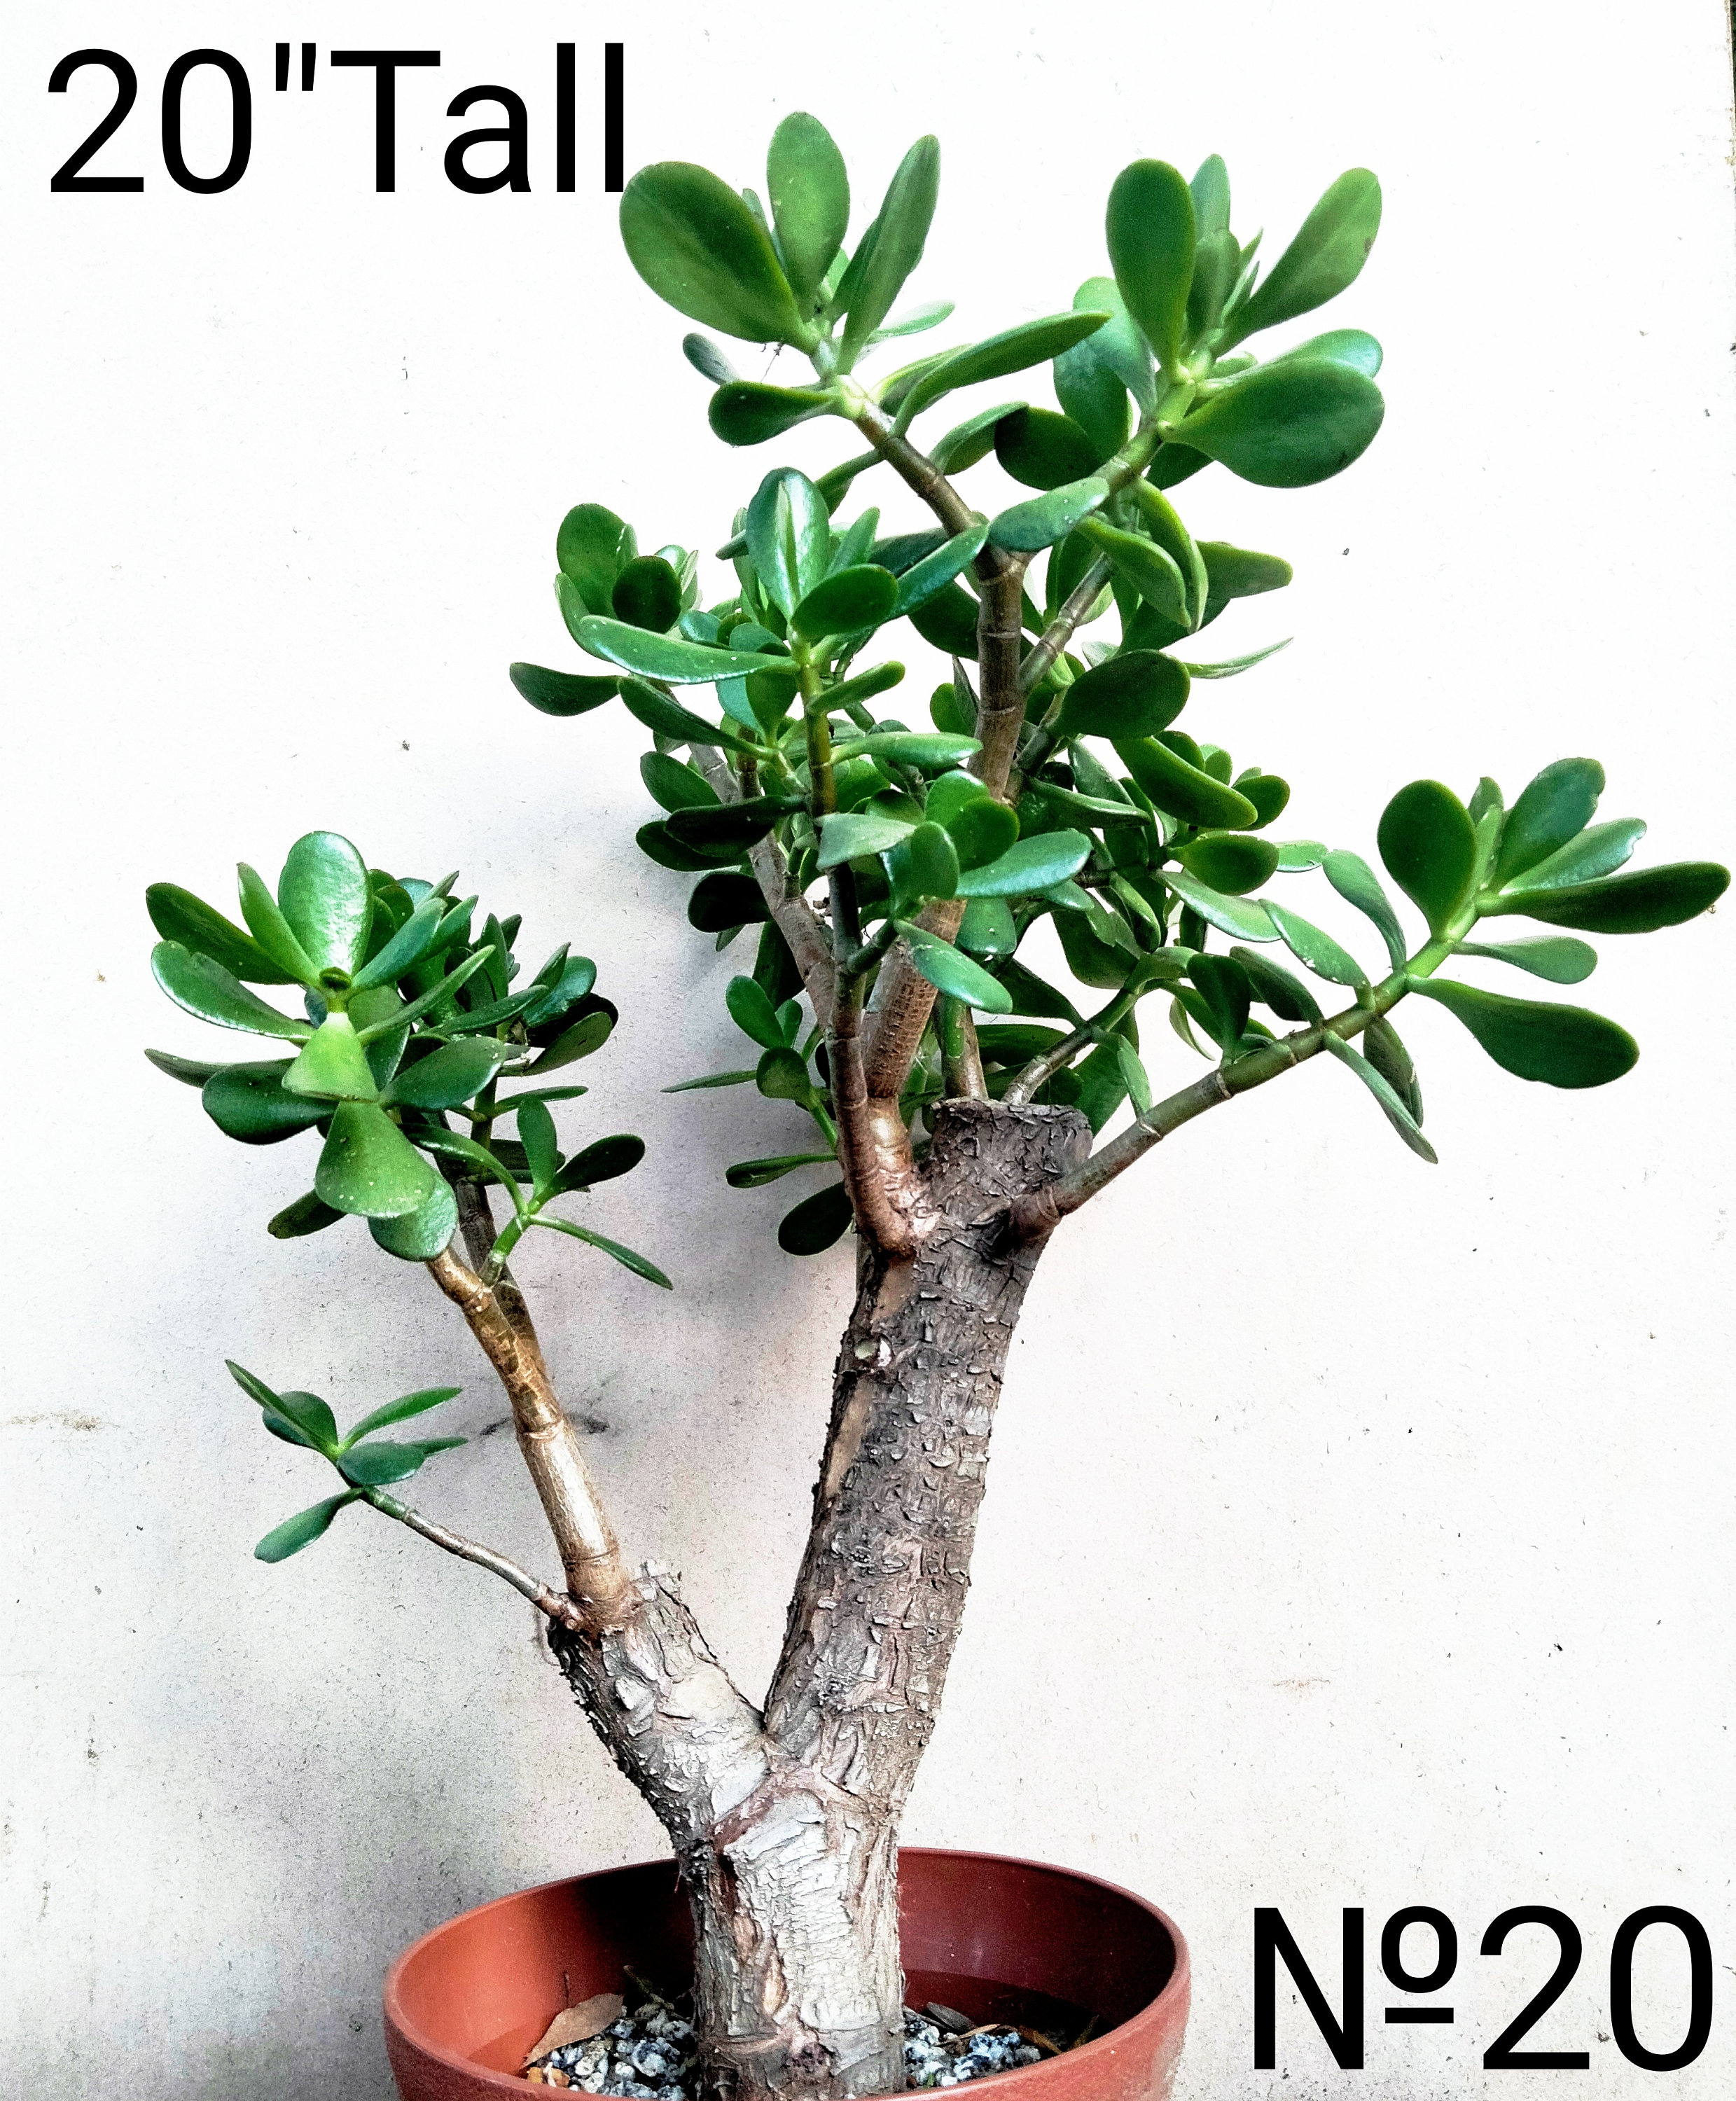 Just wanted to show you guys my Crassula Ovata Bonsai tree in it's